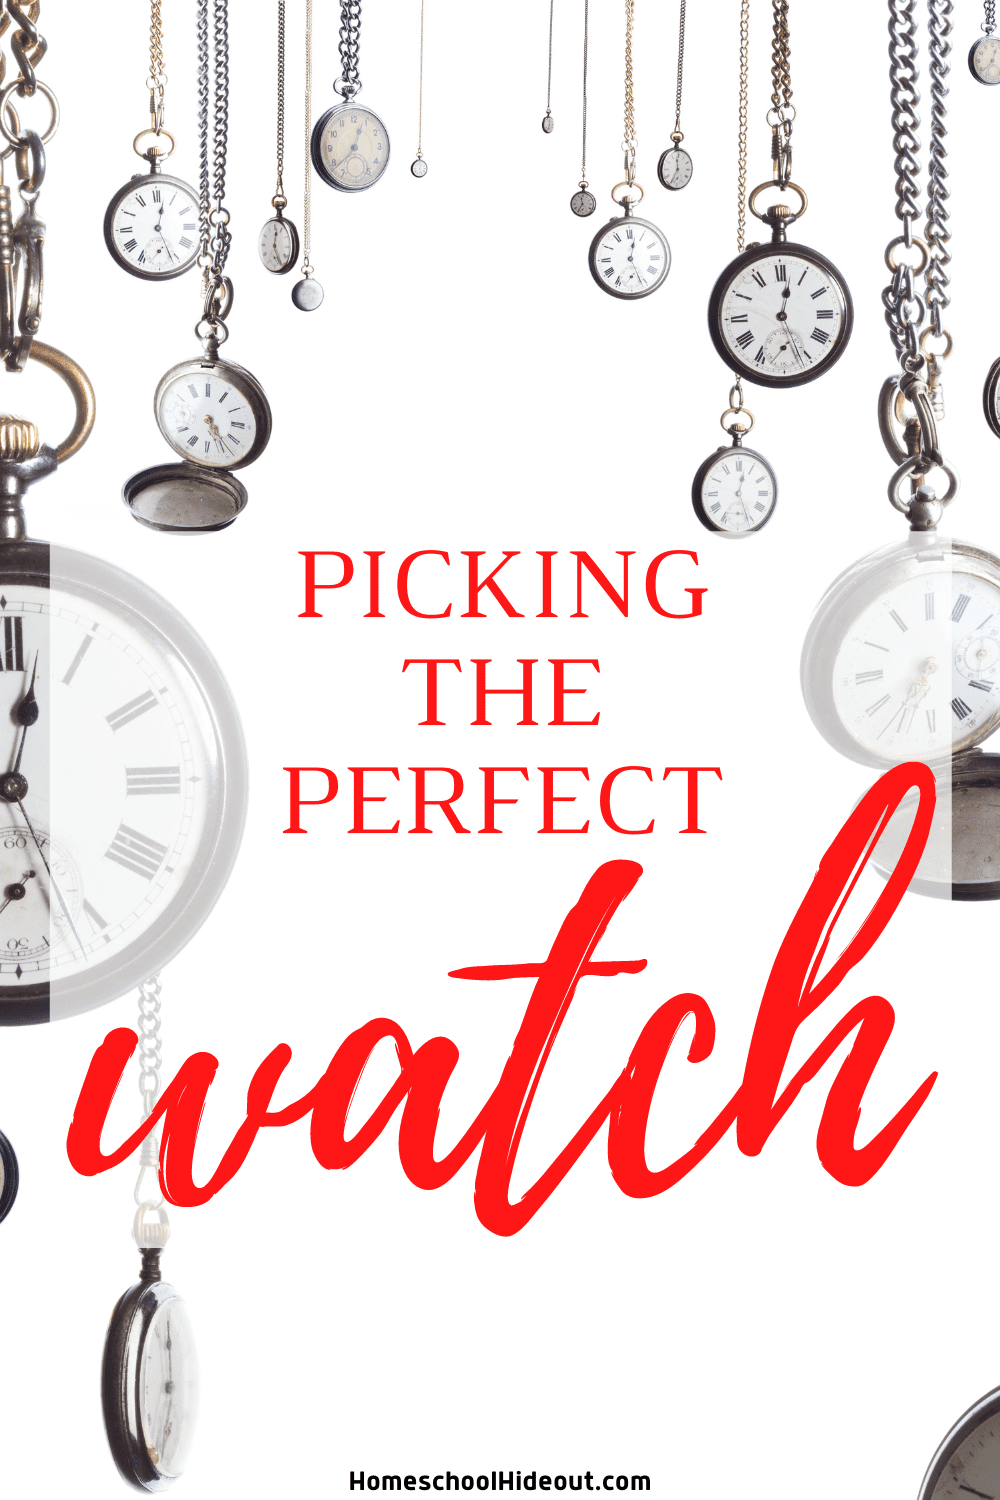 Trying to pick the best watches was harder than I thought. This broke it down and helped me make a decision easier!